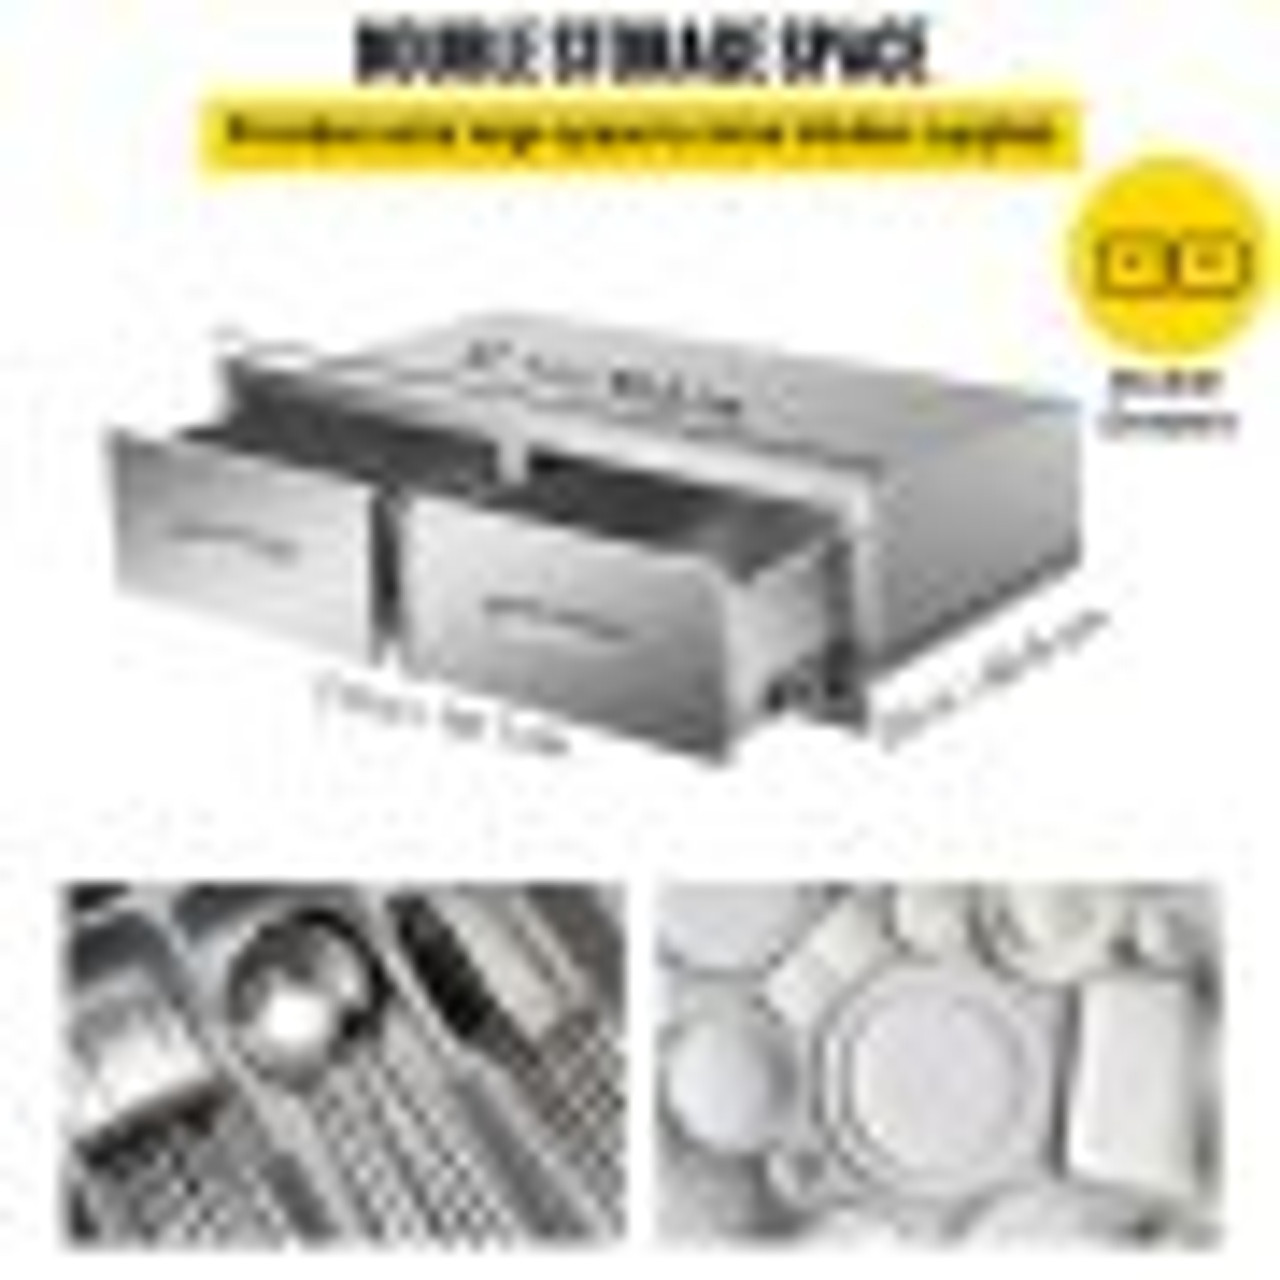 Outdoor Kitchen Drawers 30" W x 10" H x 20" D, Horizontal Double BBQ Access Drawers Stainless Steel with Handle, BBQ Island Drawers for Outdoor Kitchens or Patio Grill Station